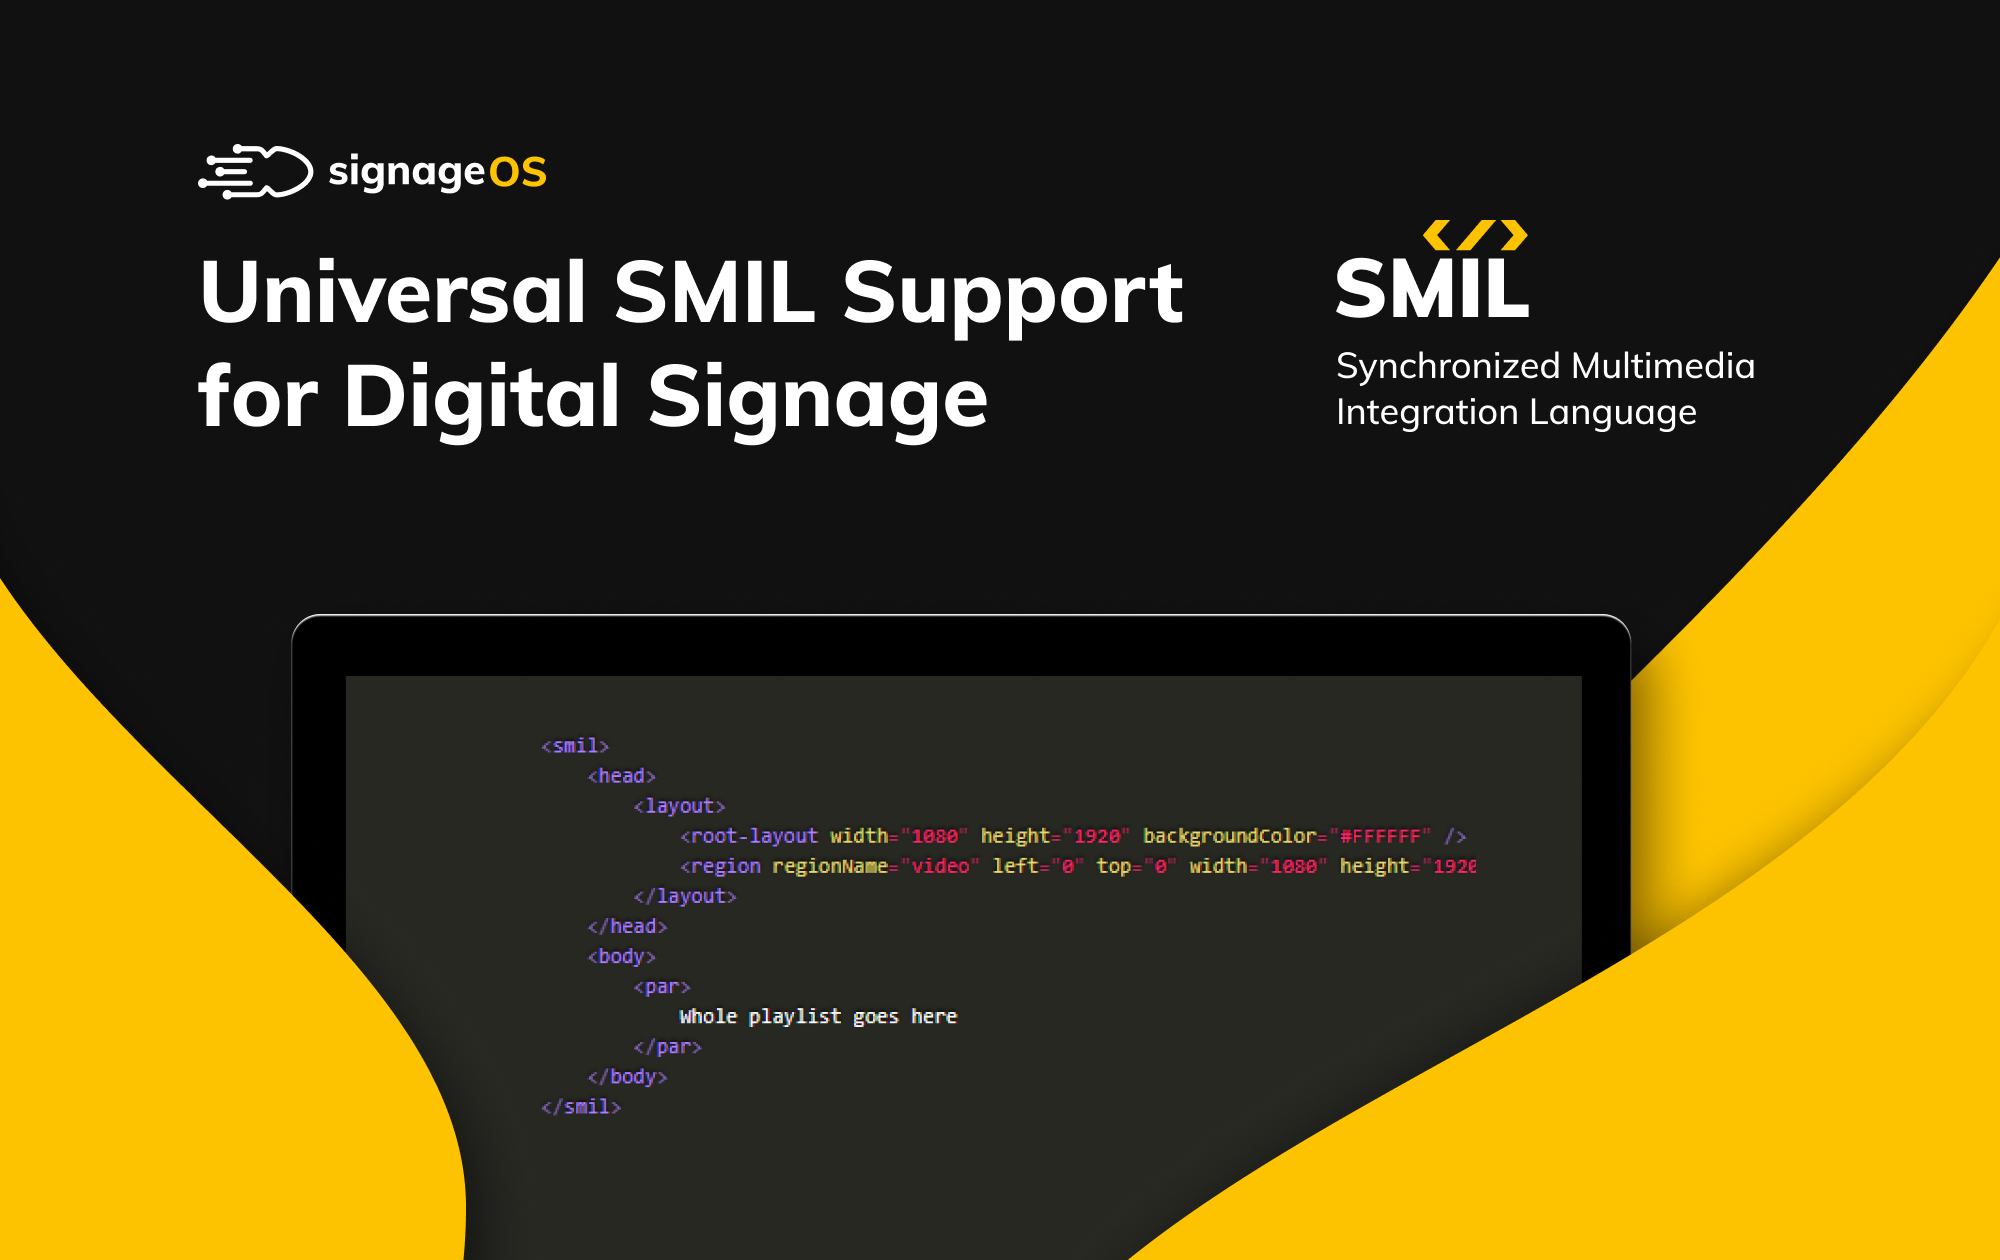 signageos universal smil support